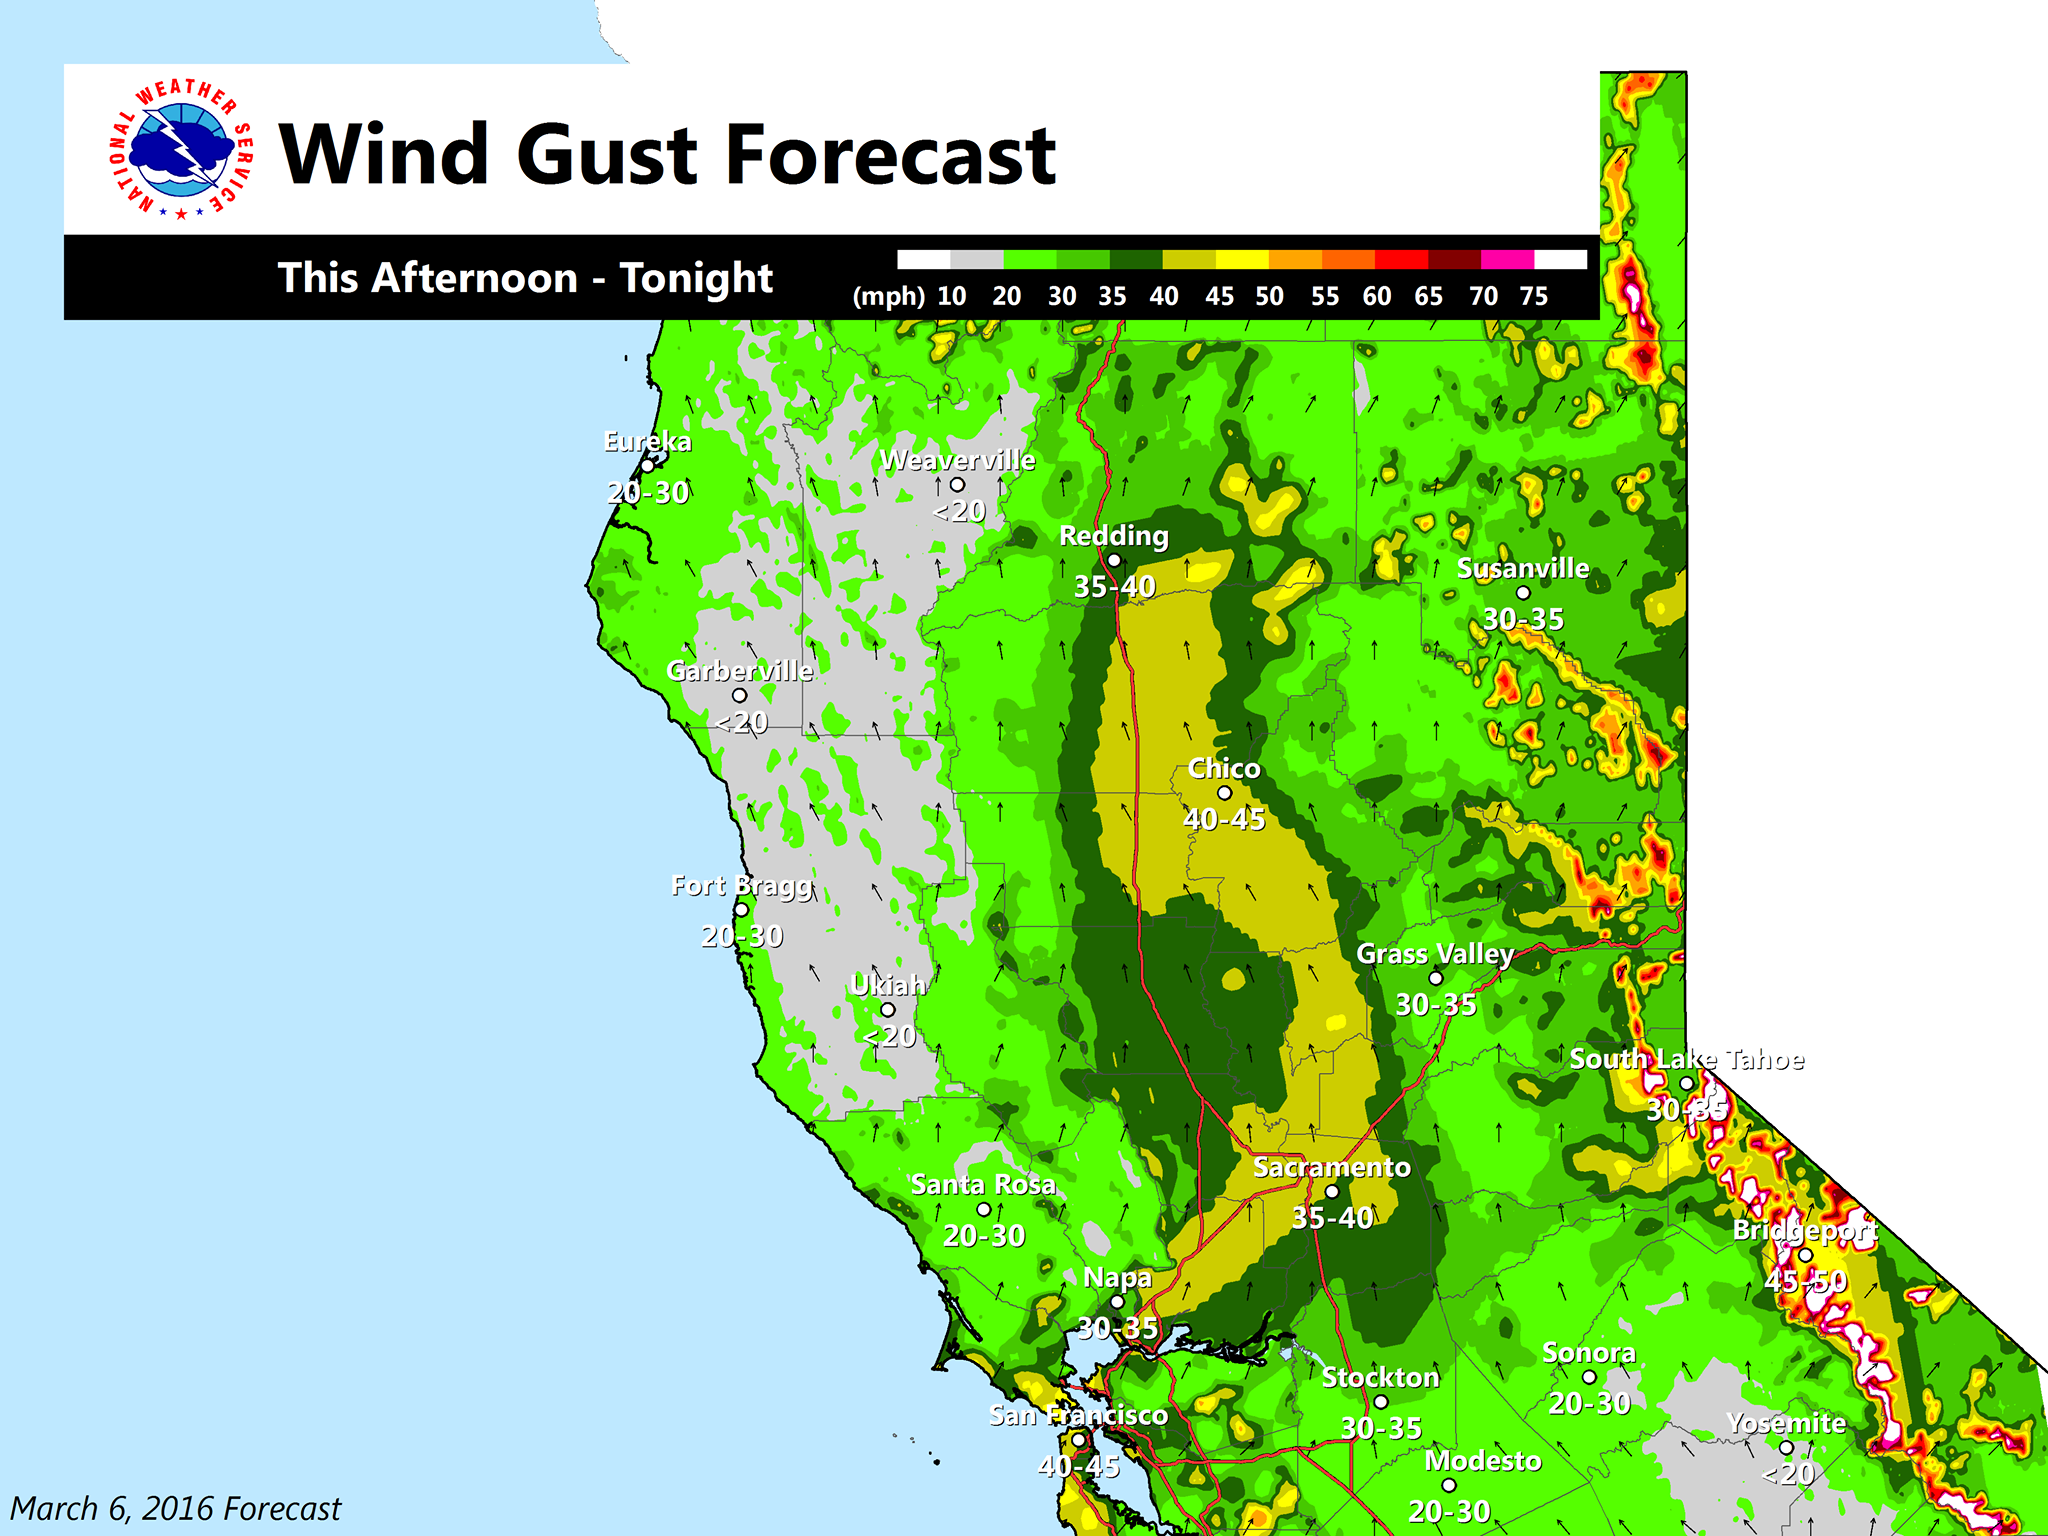 "This evening, another system will move in bringing more rain/wind. Winds will be weaker than our previous storm although still quite strong. 1-2 ft. of snow above 4000ft!" - NOAA Sacramento, CA today